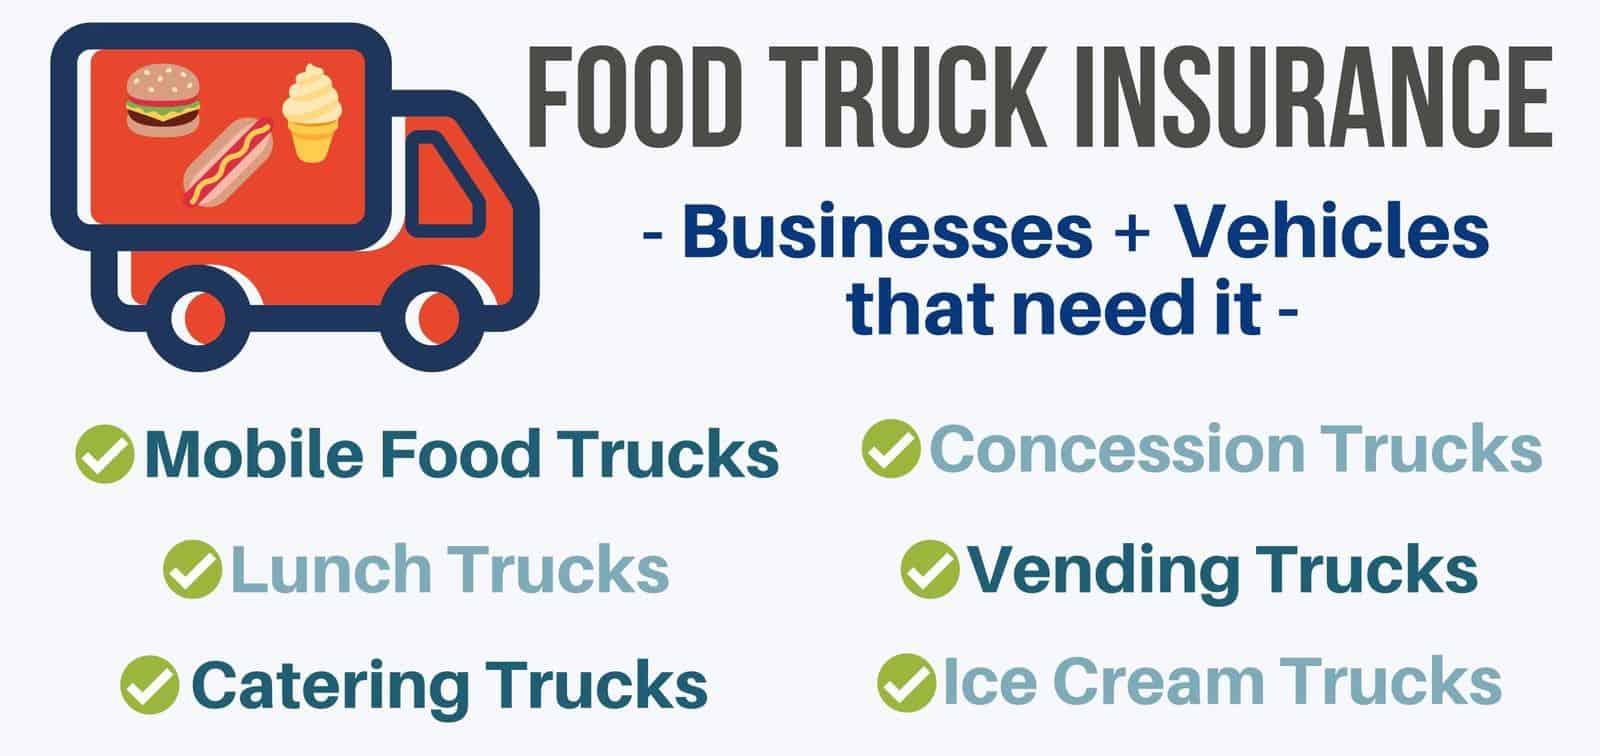 business that need food truck insurance